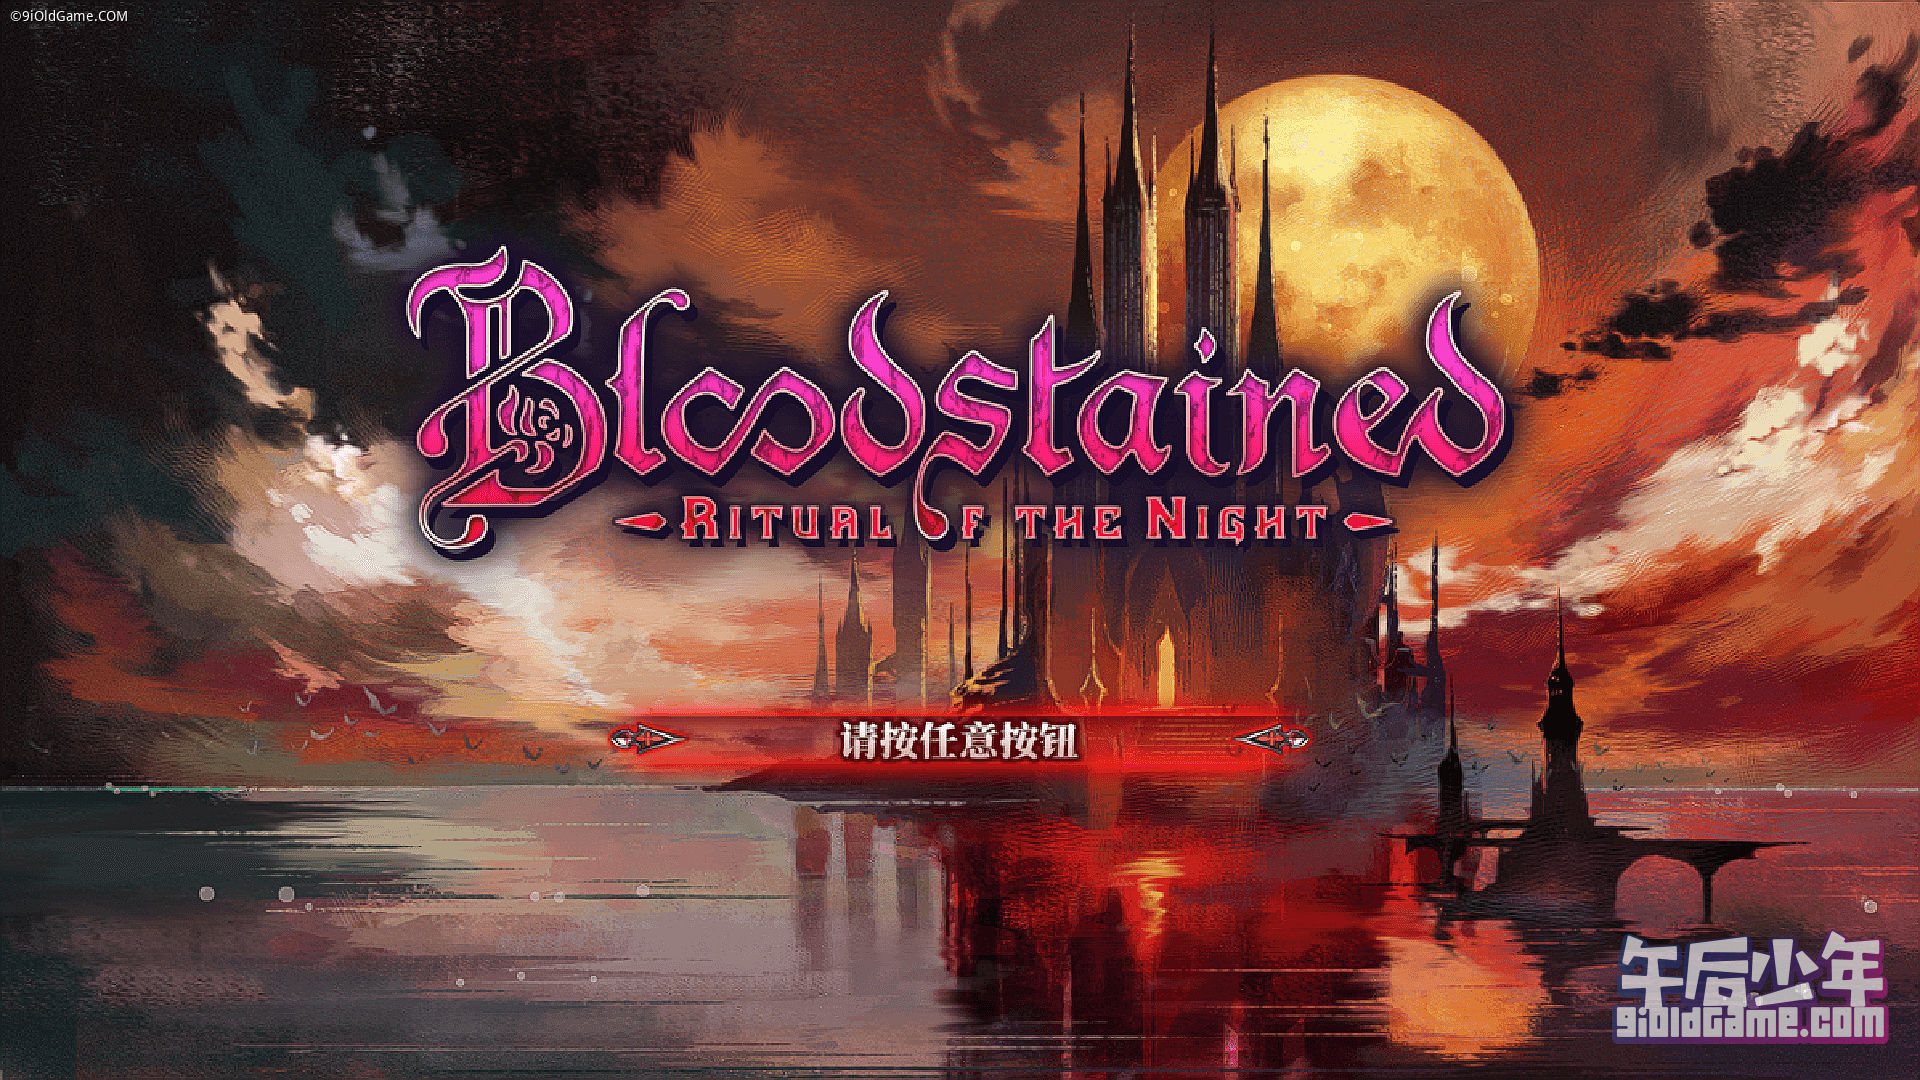 Switch 模拟器 Yuzu，Bloodstained Ritual of the Night血污